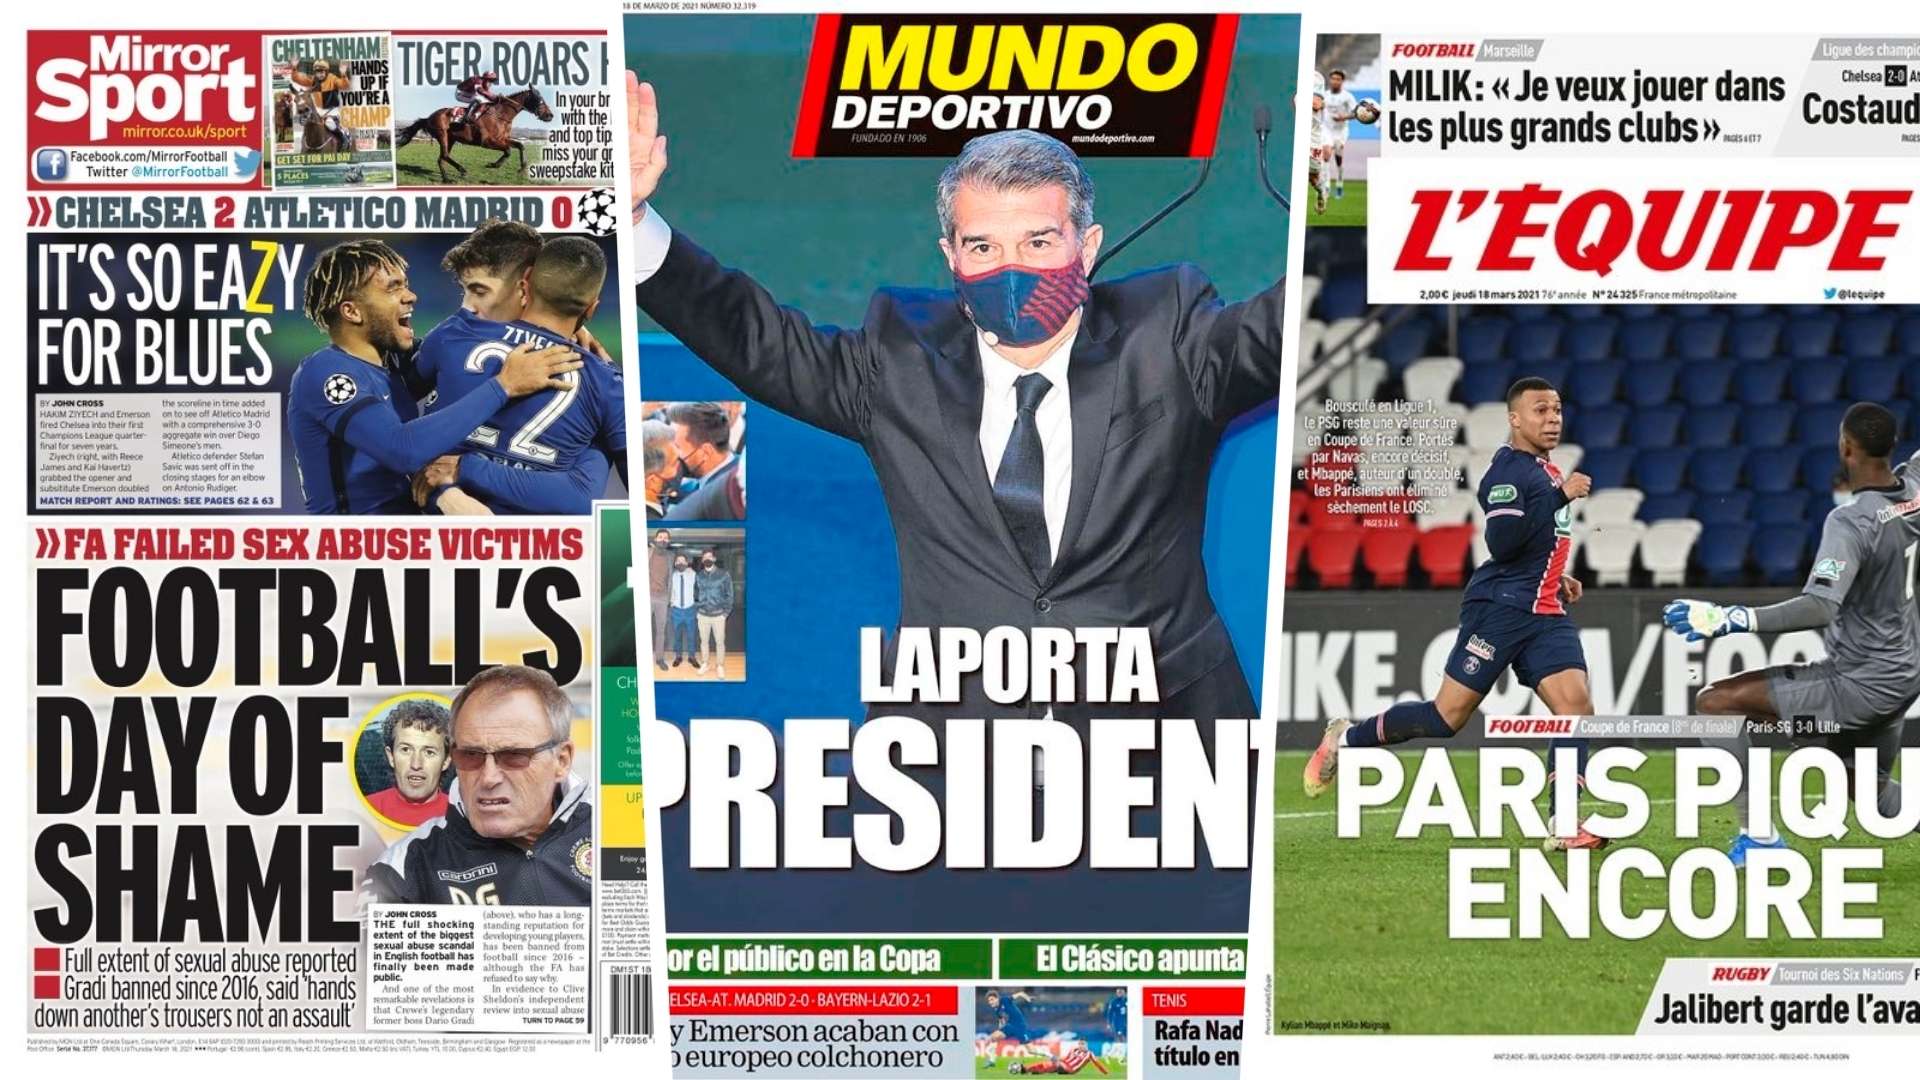 18 March newspapers